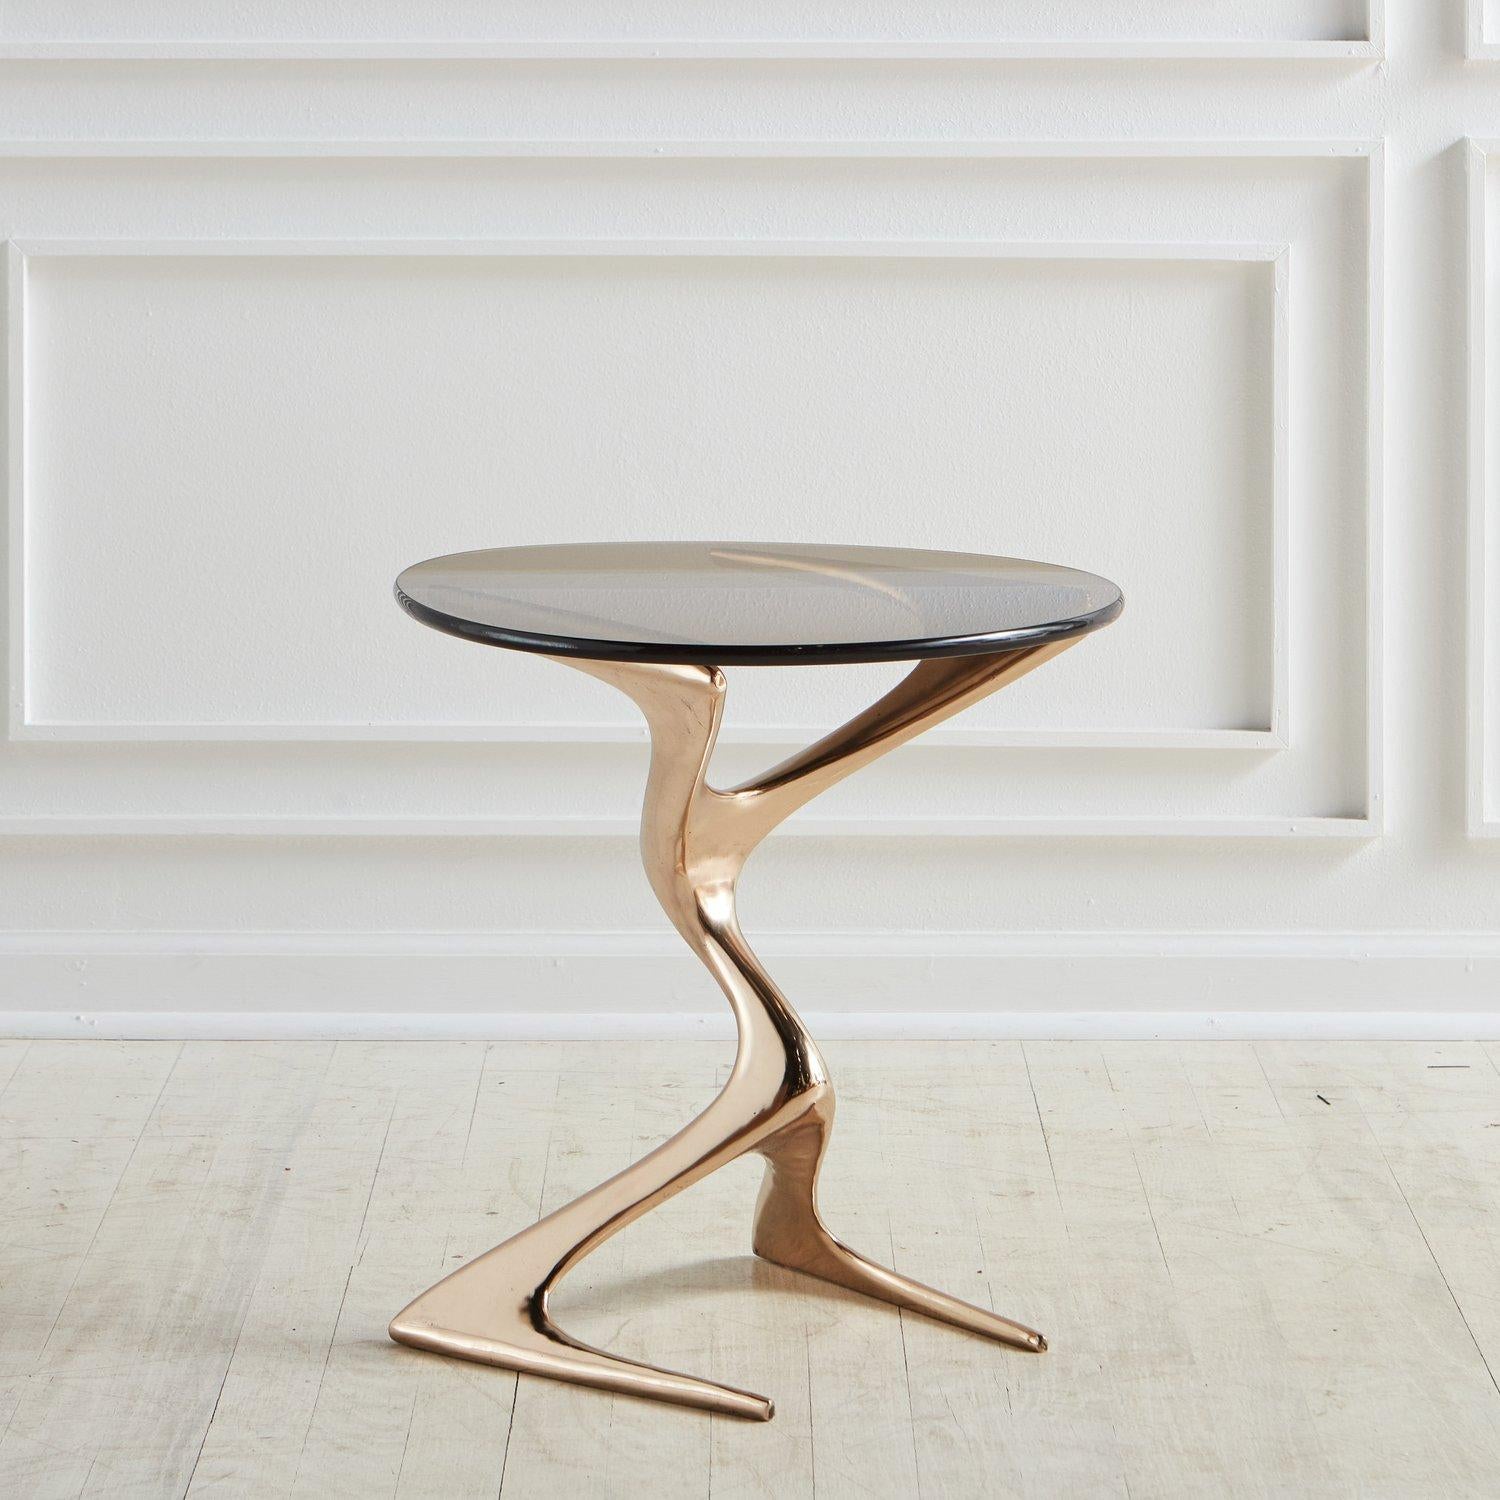 A Zora side table by Chicago artist Karl Geckler in polished bronze with a guitar-pick shaped bronze tinted glass top. Alternative finishes available. Inquire for details.

Karl Geckler works as an interdisciplinary sculptor, architect, and designer